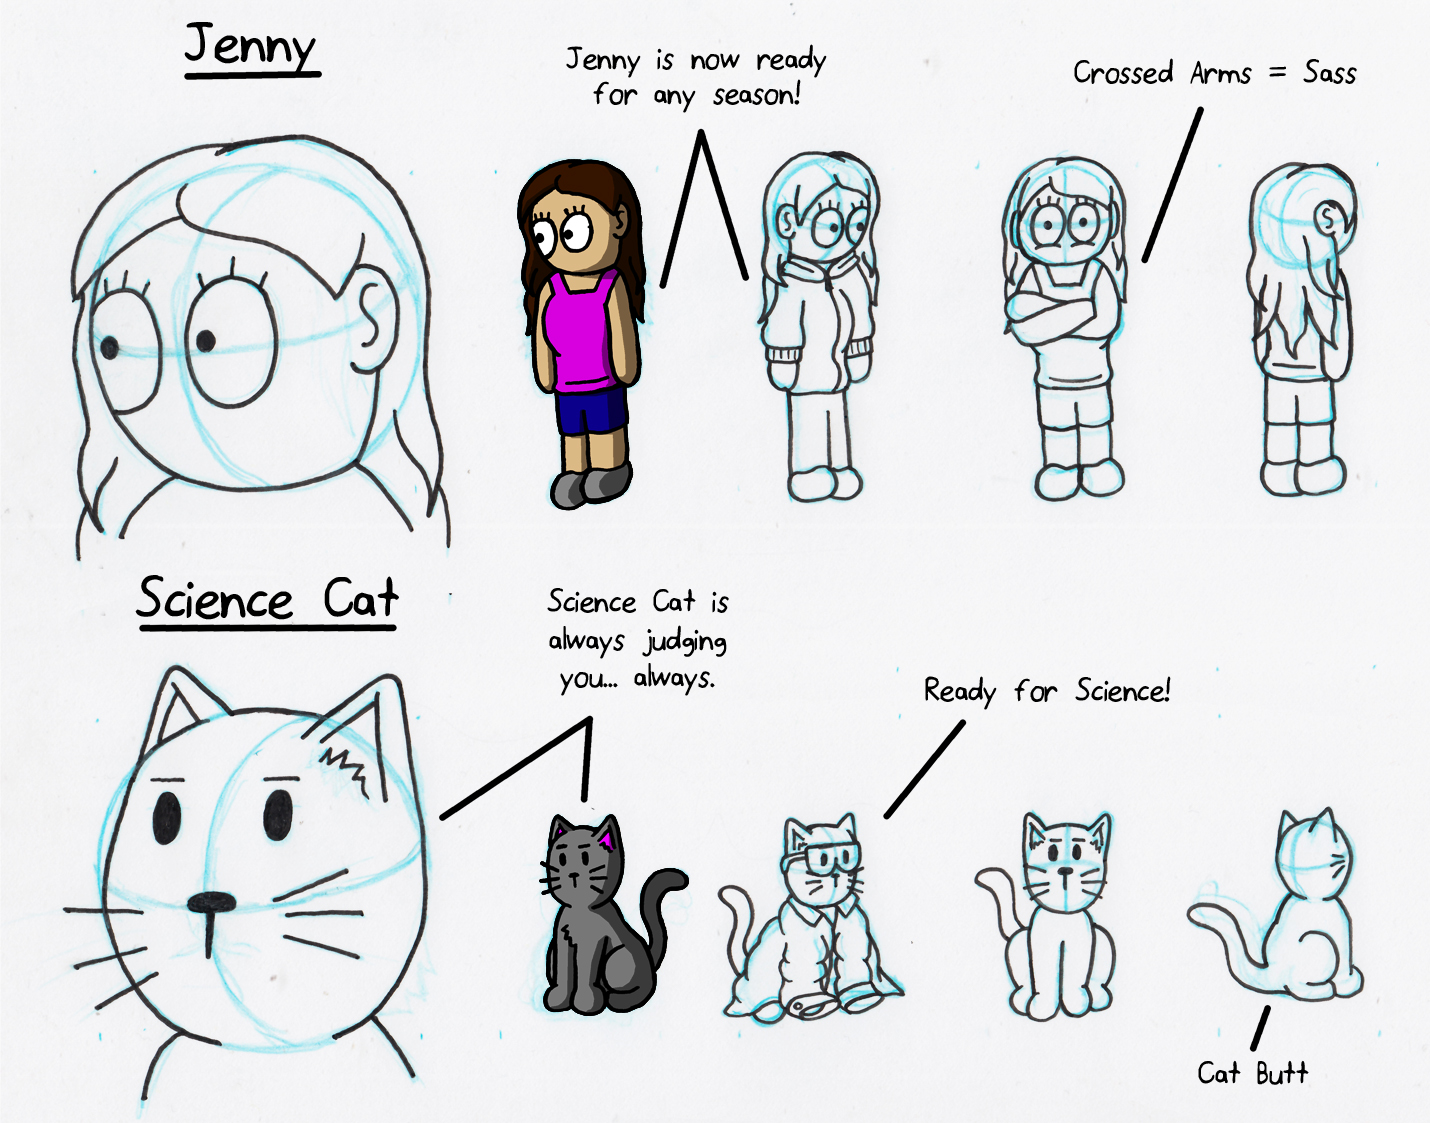 Fun Fact:  Science Cat invented 7 forms of interdimensional travel  during this redesign... you wouldn't understand 8 of them.